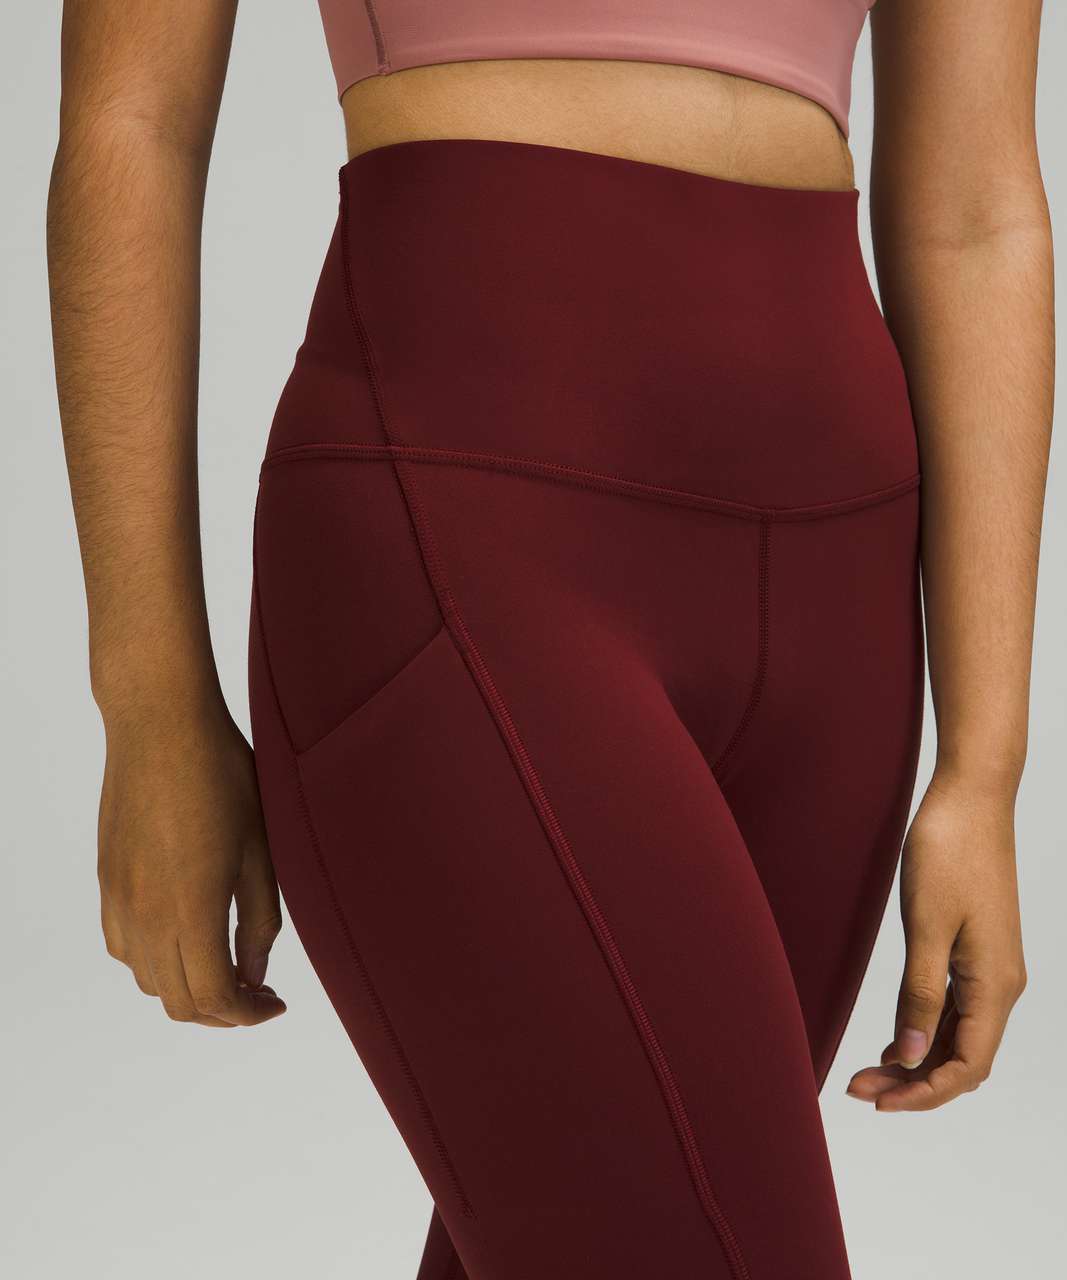 Lululemon Align High Rise Pant with Pockets 25" - Red Merlot